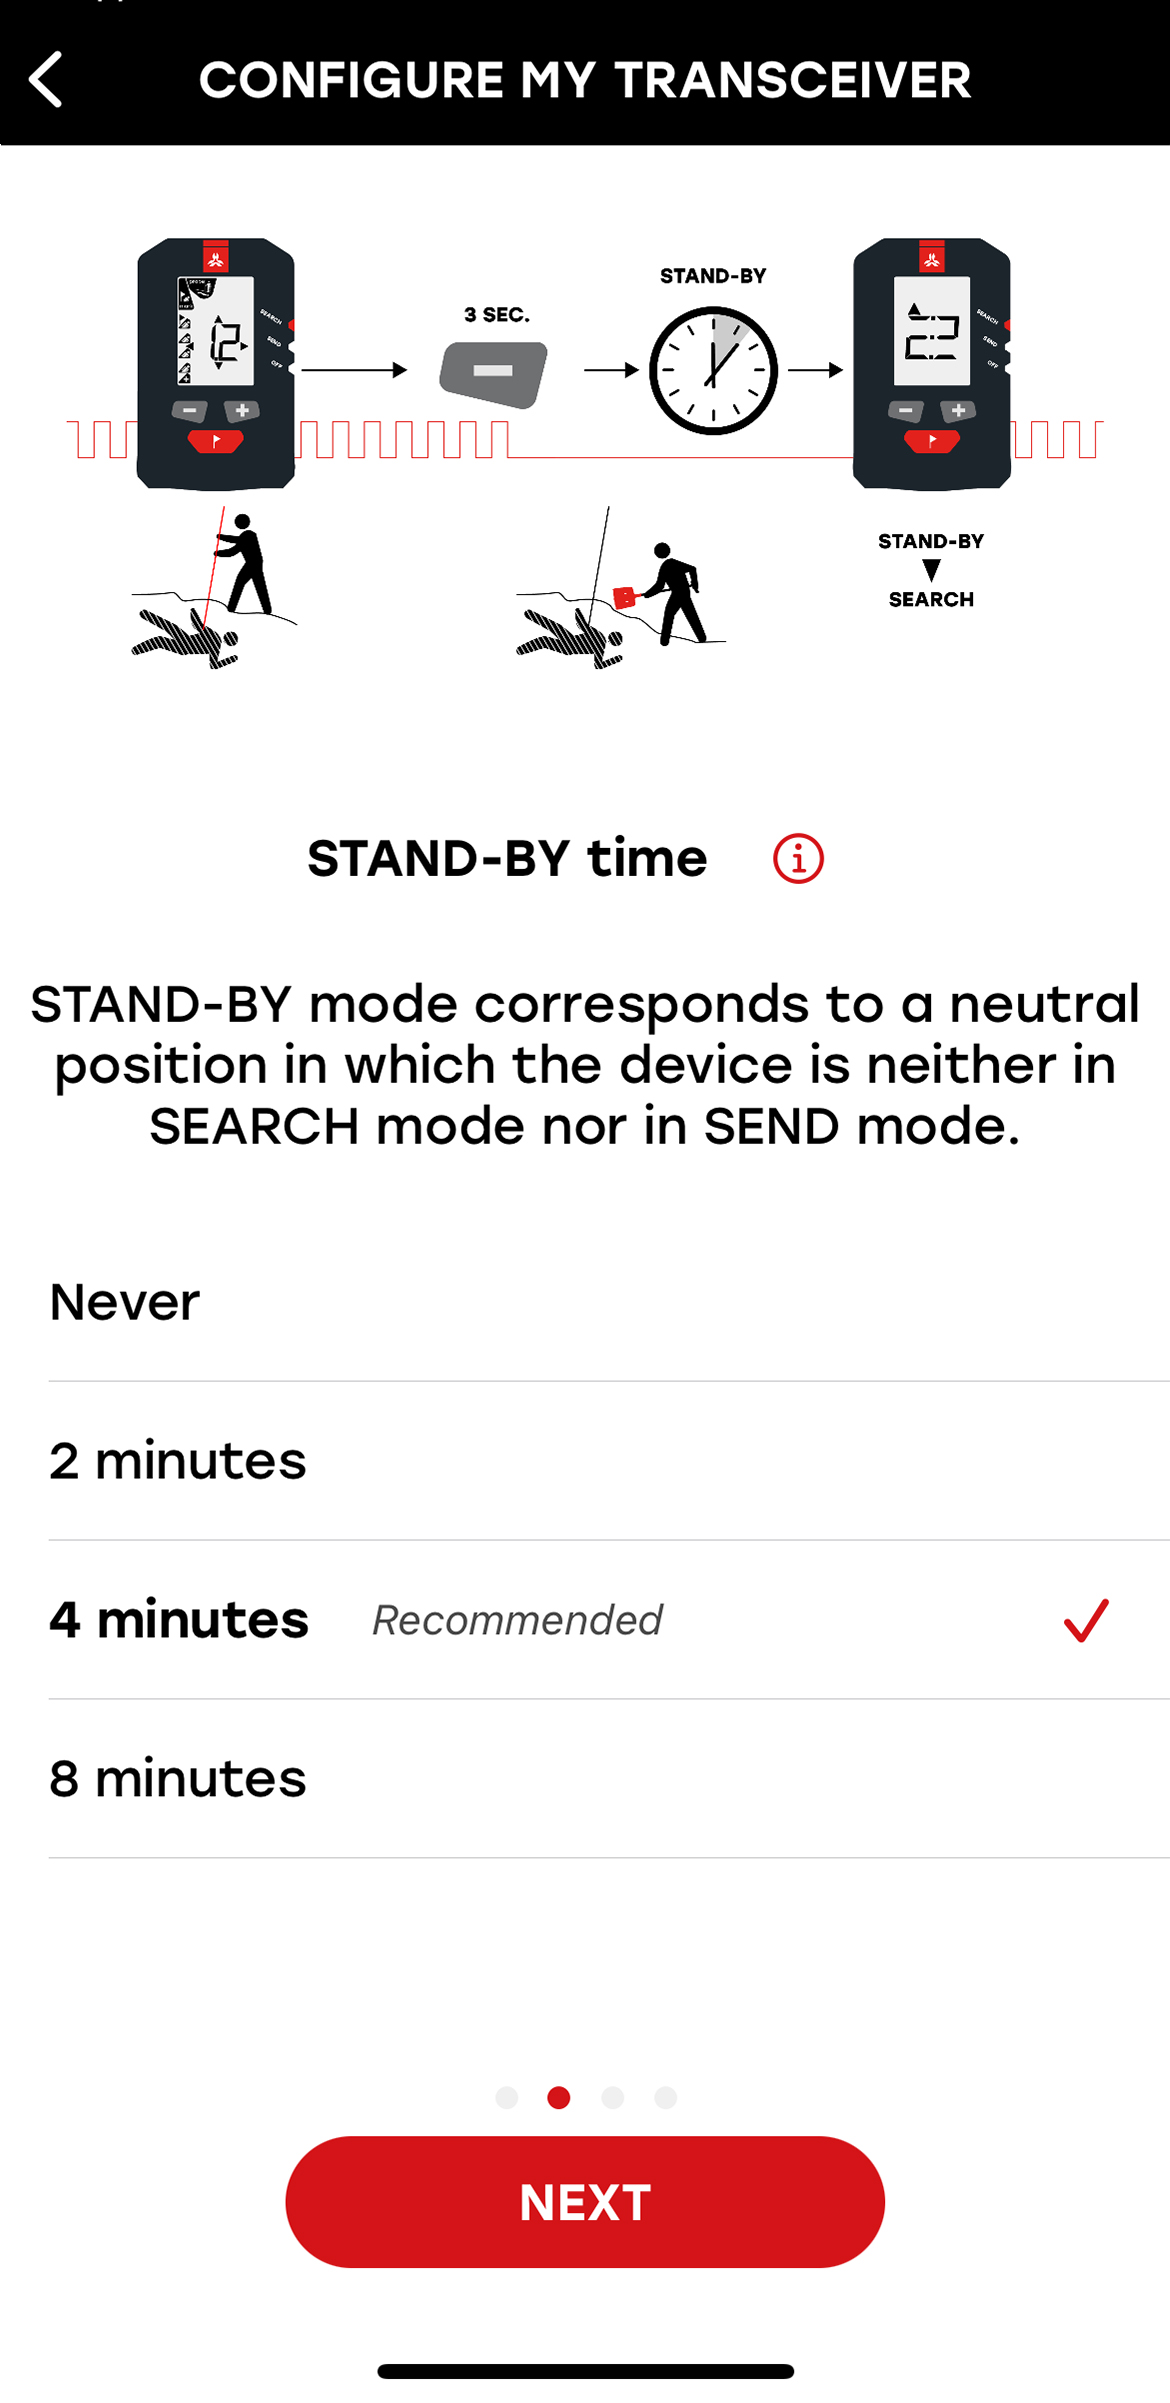 You can select the time you stay in stand by mode in Arva's app.